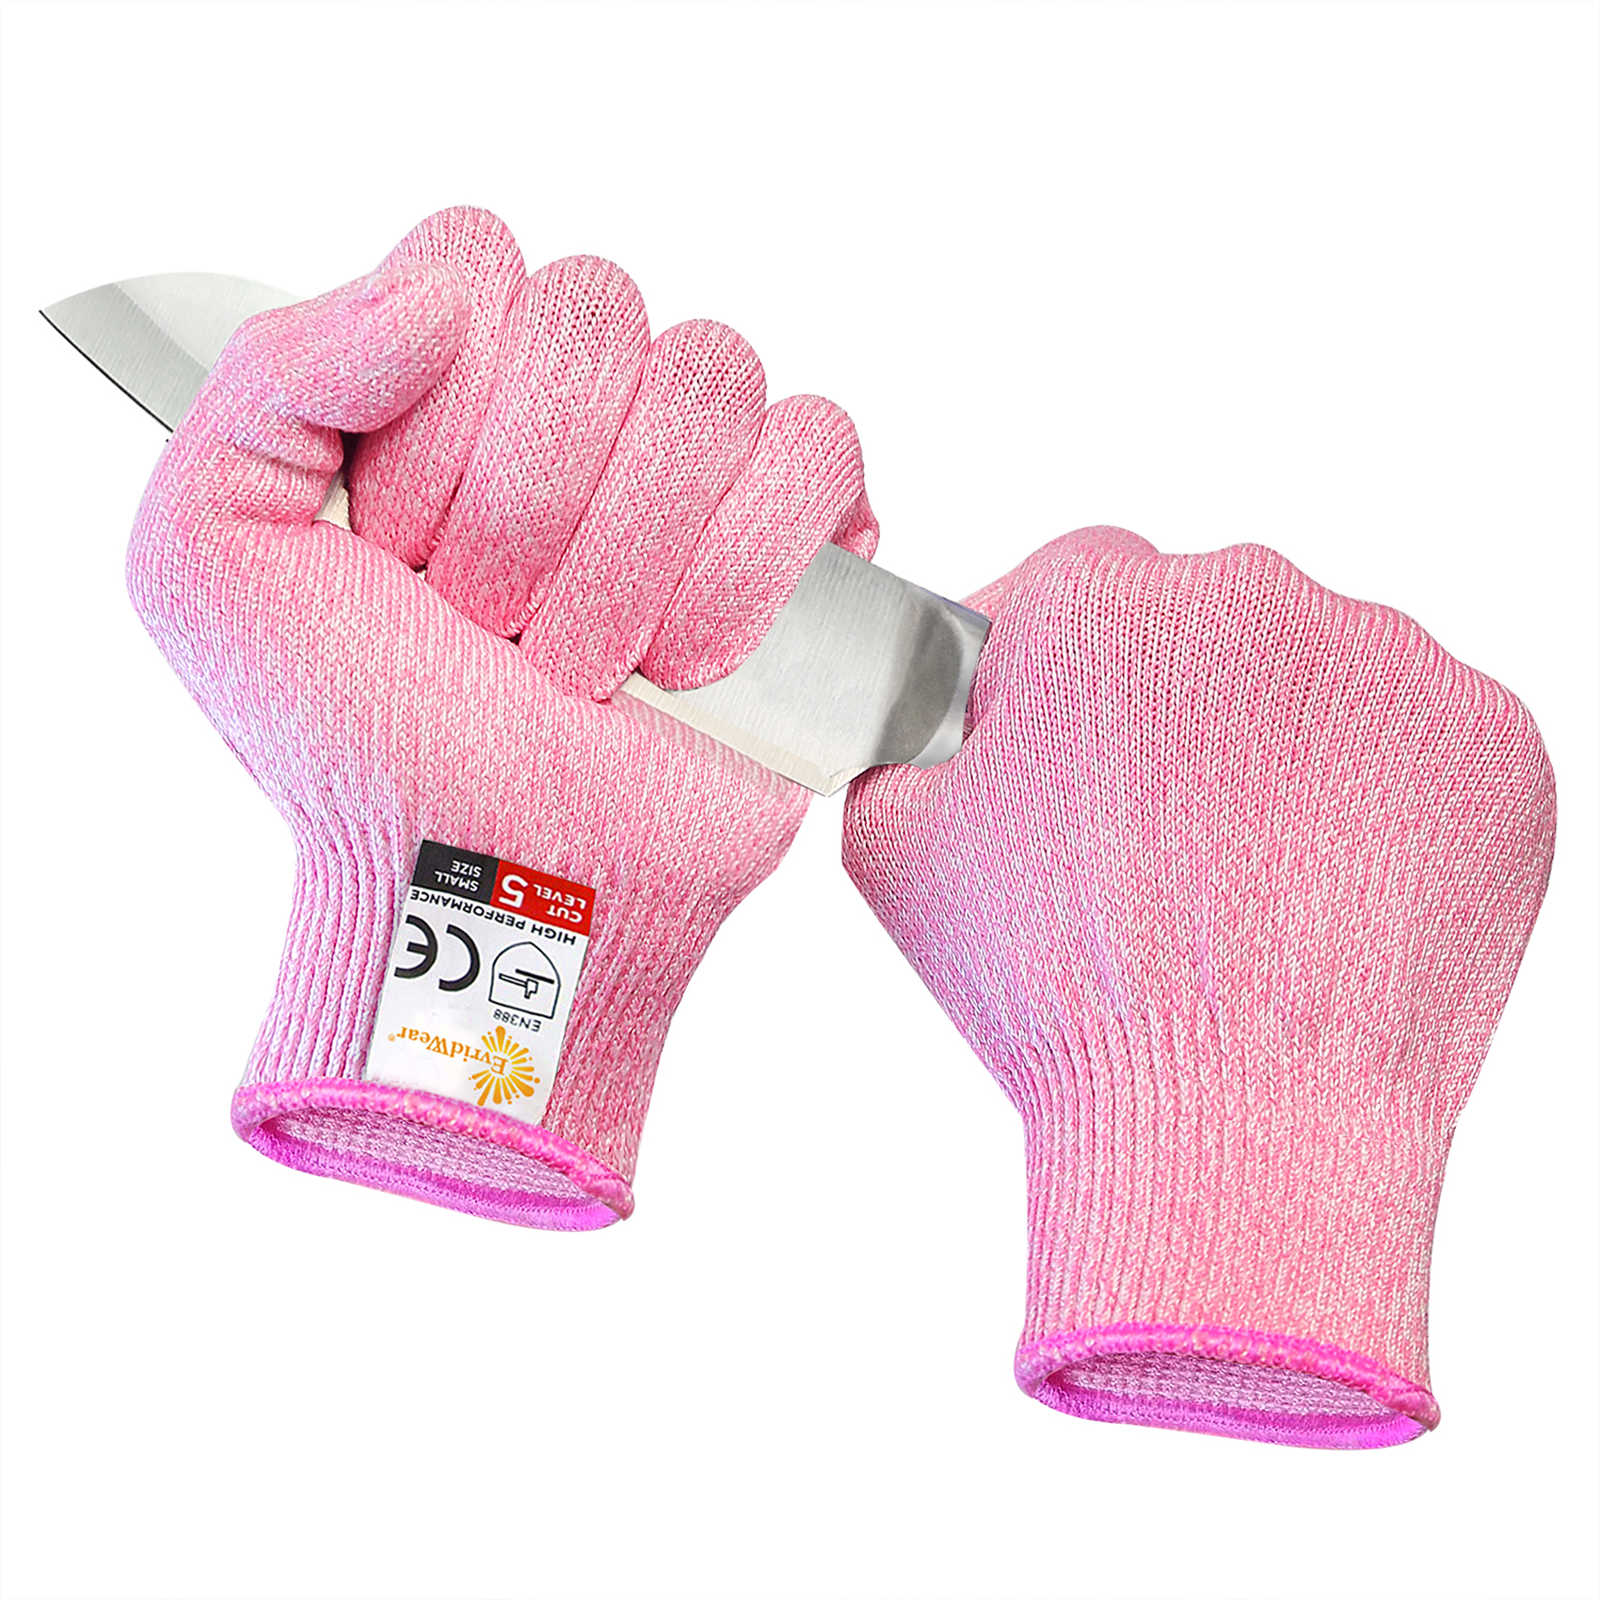 Protective Cut Resistant Gloves Level 5 Certified Safety Protection Kitchen  Meat Cut Wood Carving Cut Proof Stab Butcher